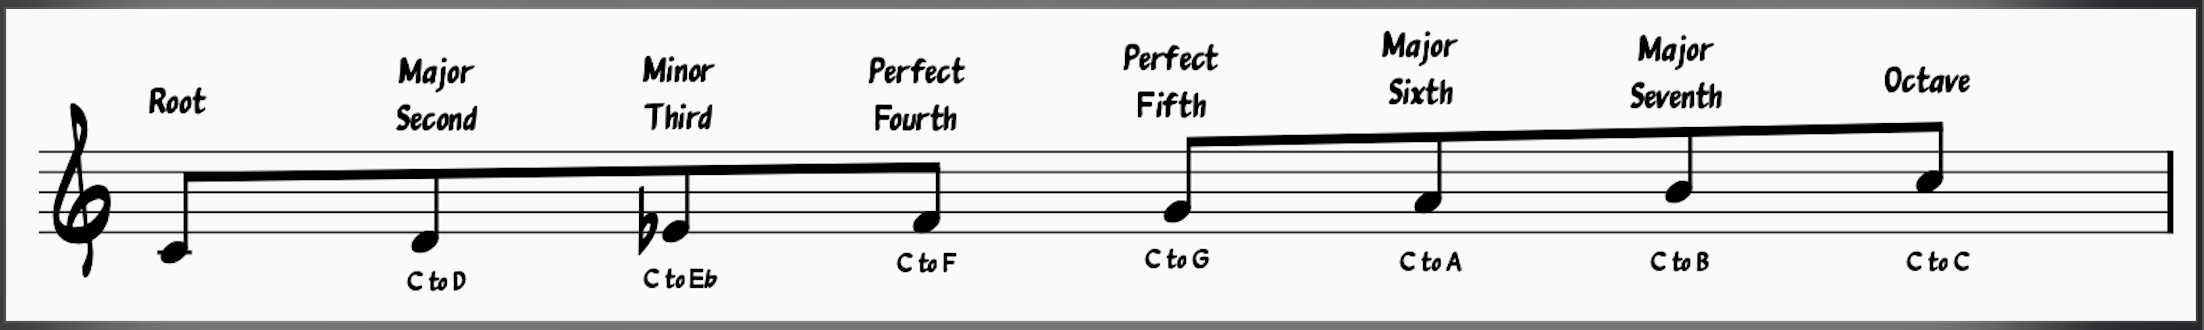 C Melodic minor scale intervals and melodic minor scale degrees.